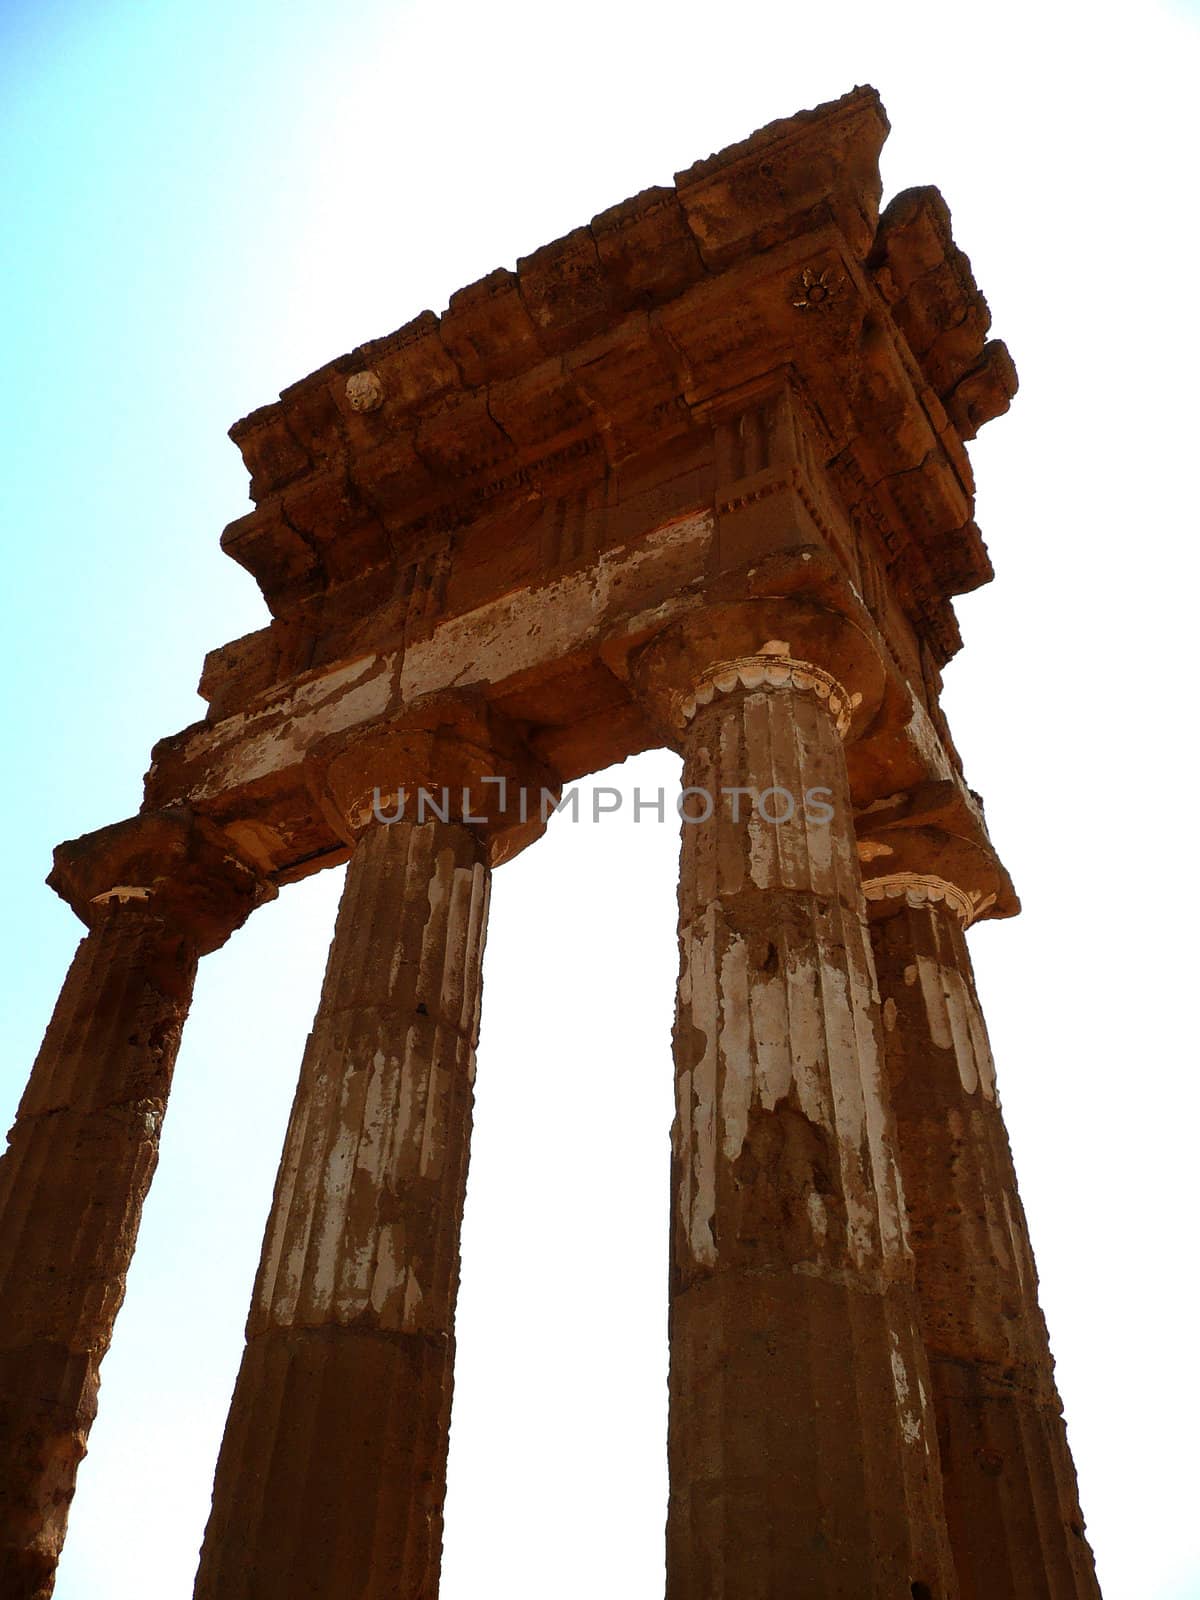 Temple of Castor and Pollux, Agrigento, Italy by marcorubino